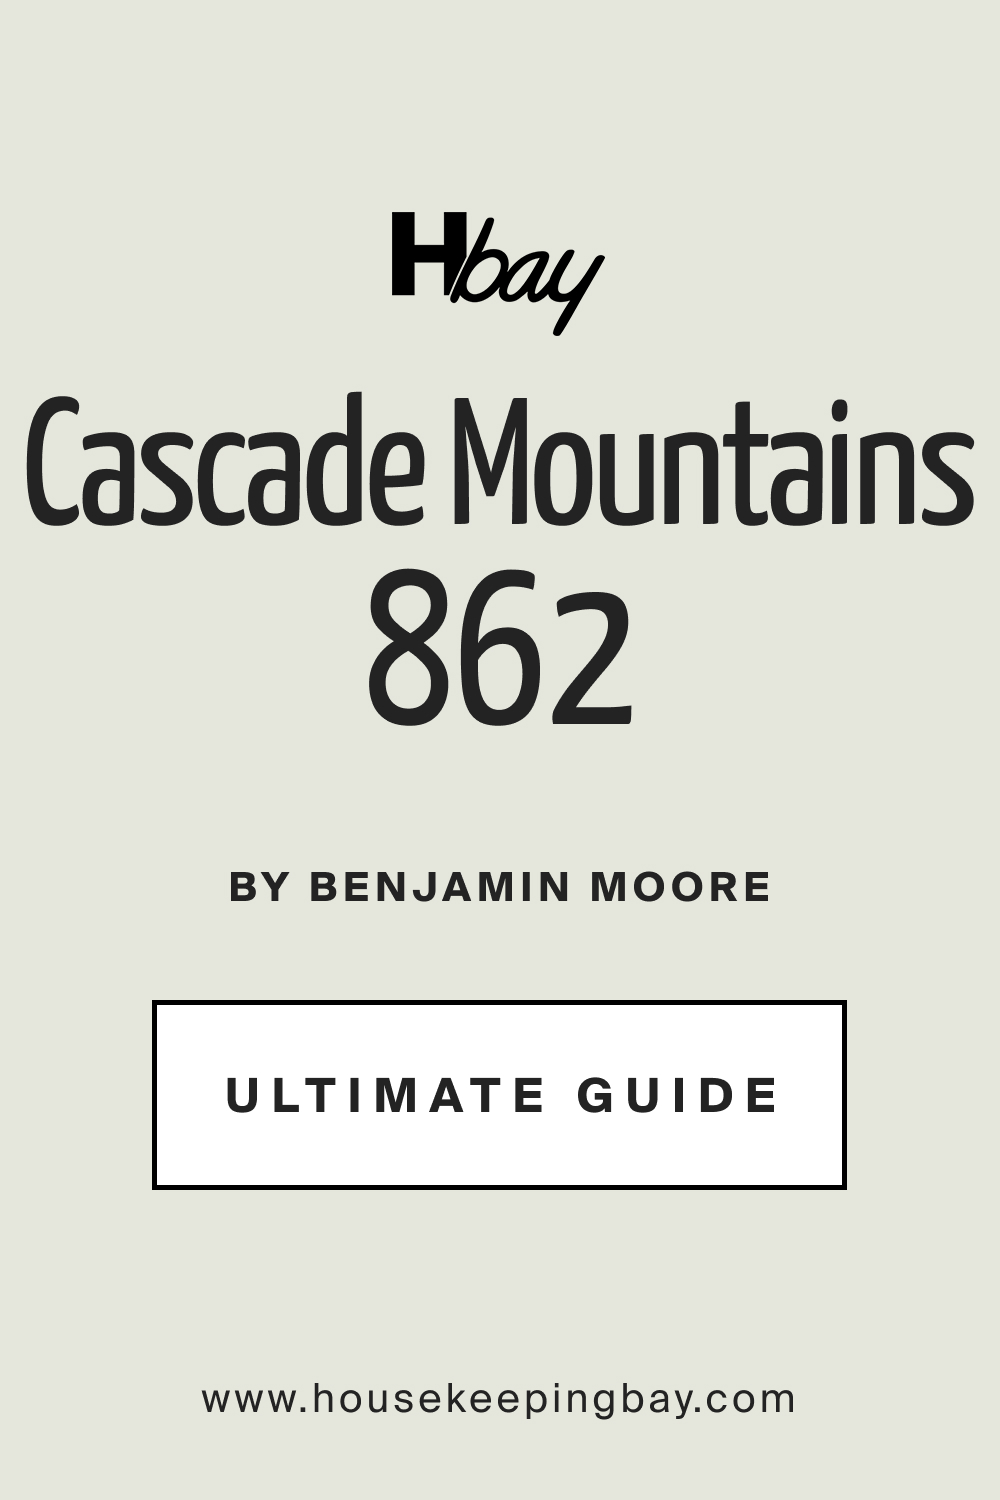 Guide of Cascade Mountains 862 Paint Color by Benjamin Moore